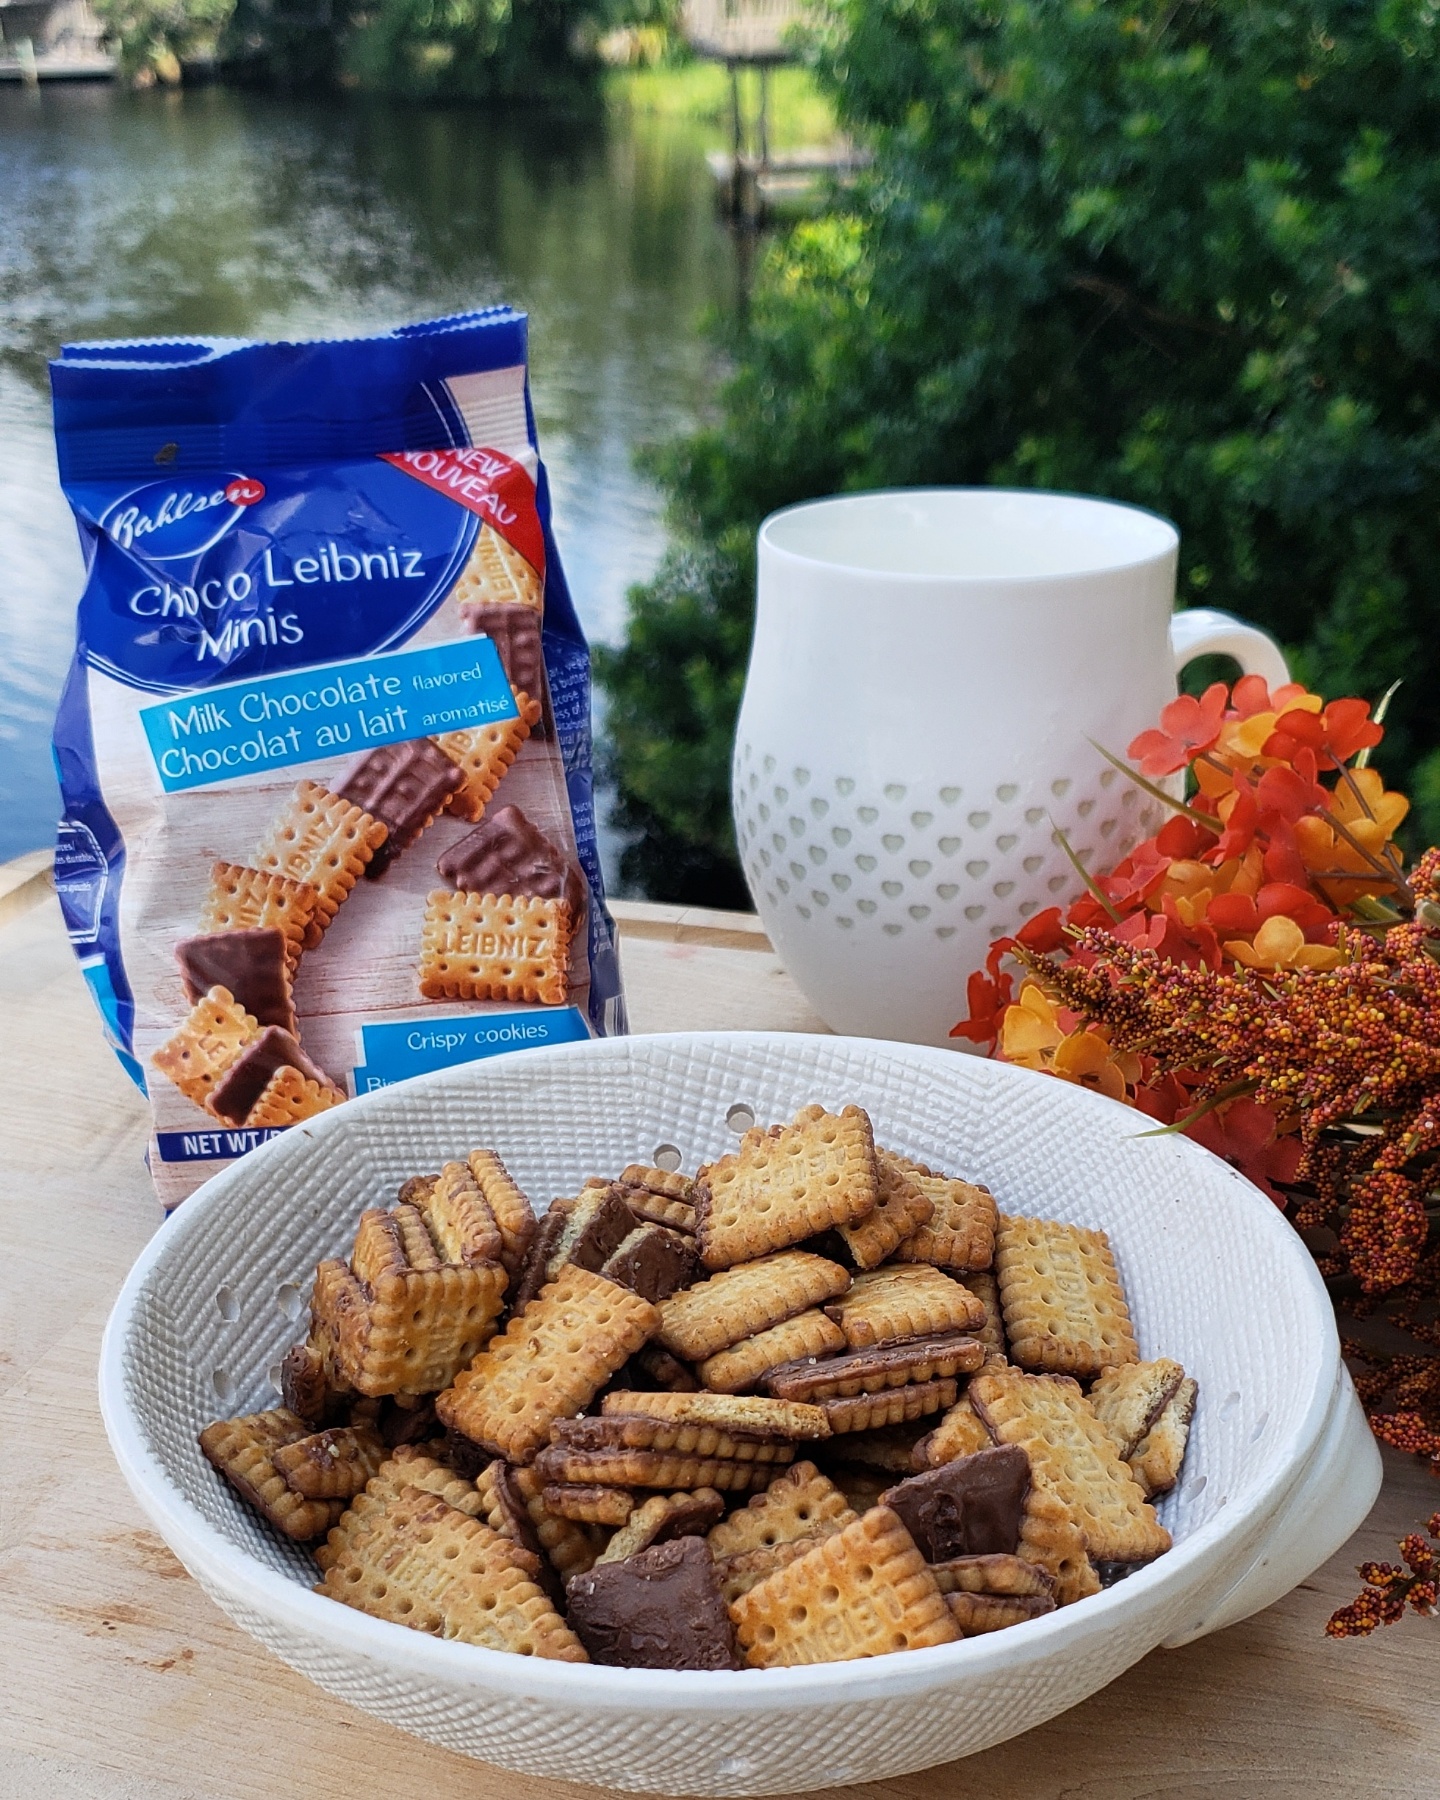 Bag of Choco Leibniz cookies, and a plate full of these mini cookies